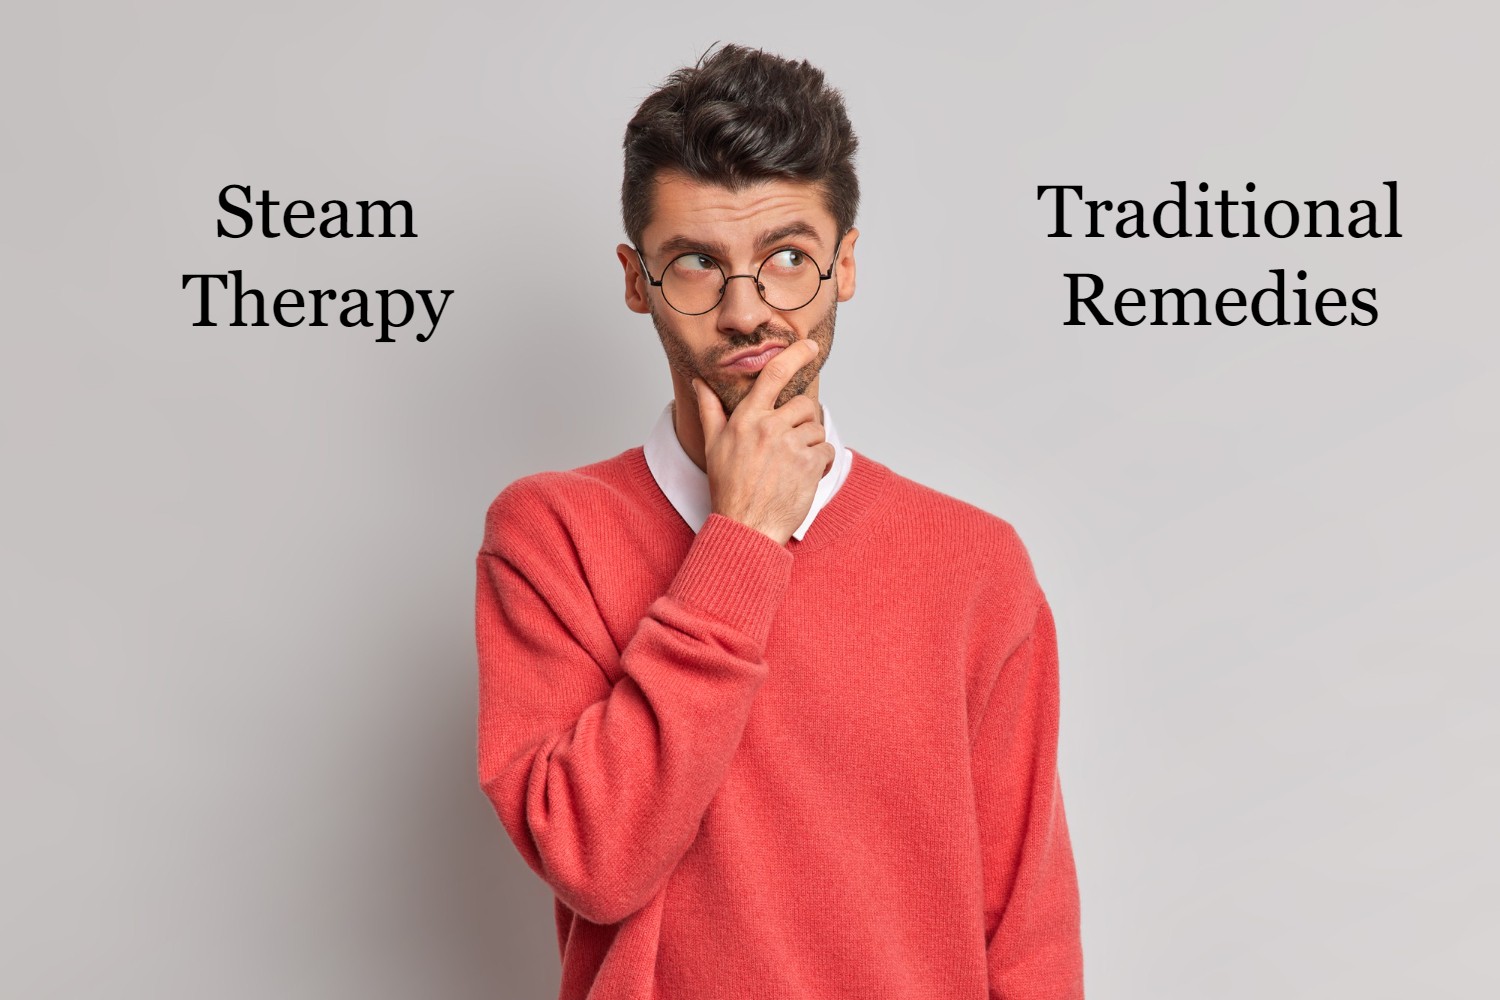 Steam Therapy vs. Traditional Remedies: Which is Right for You? 